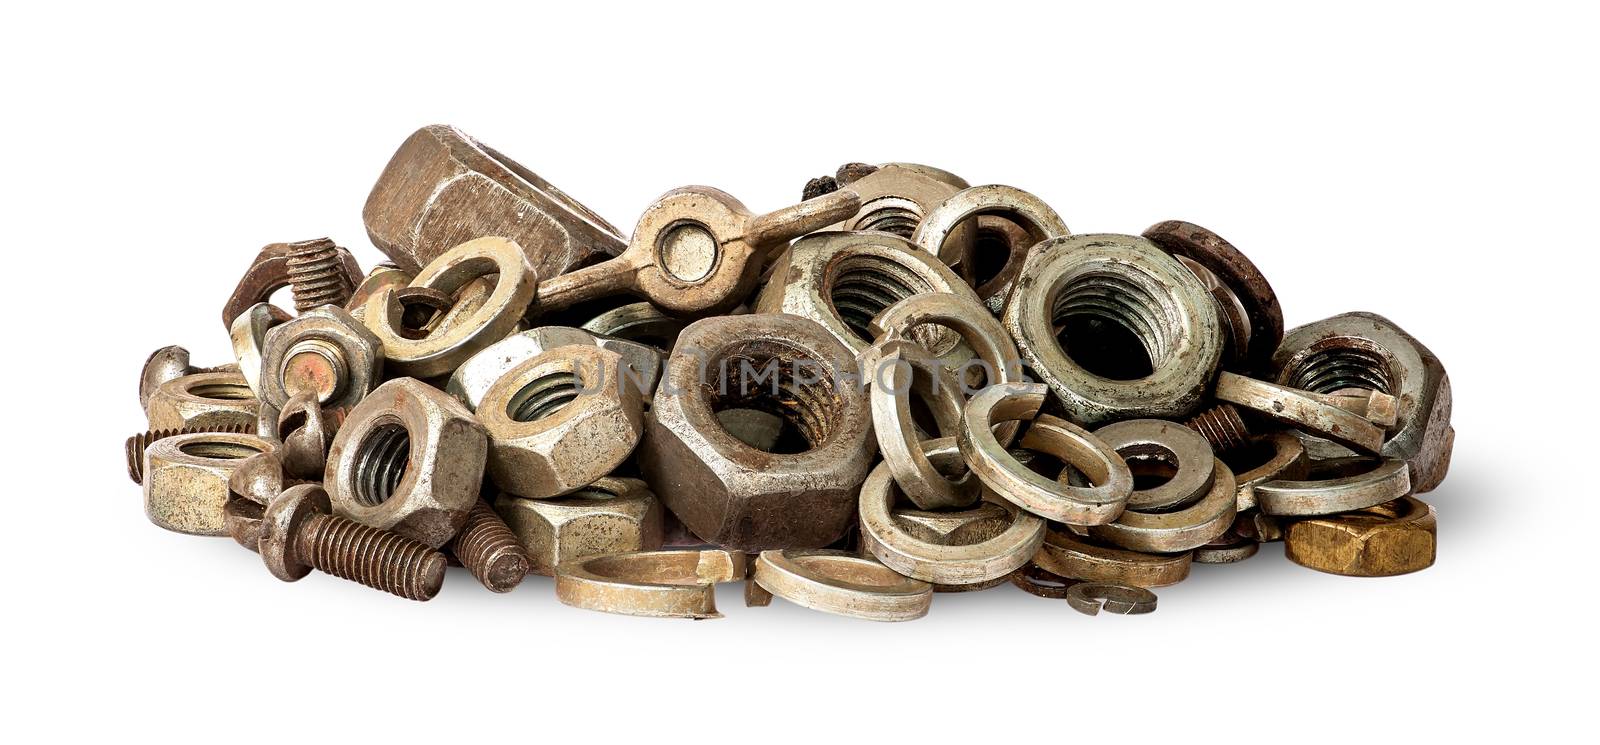 Pile of old fasteners by Cipariss